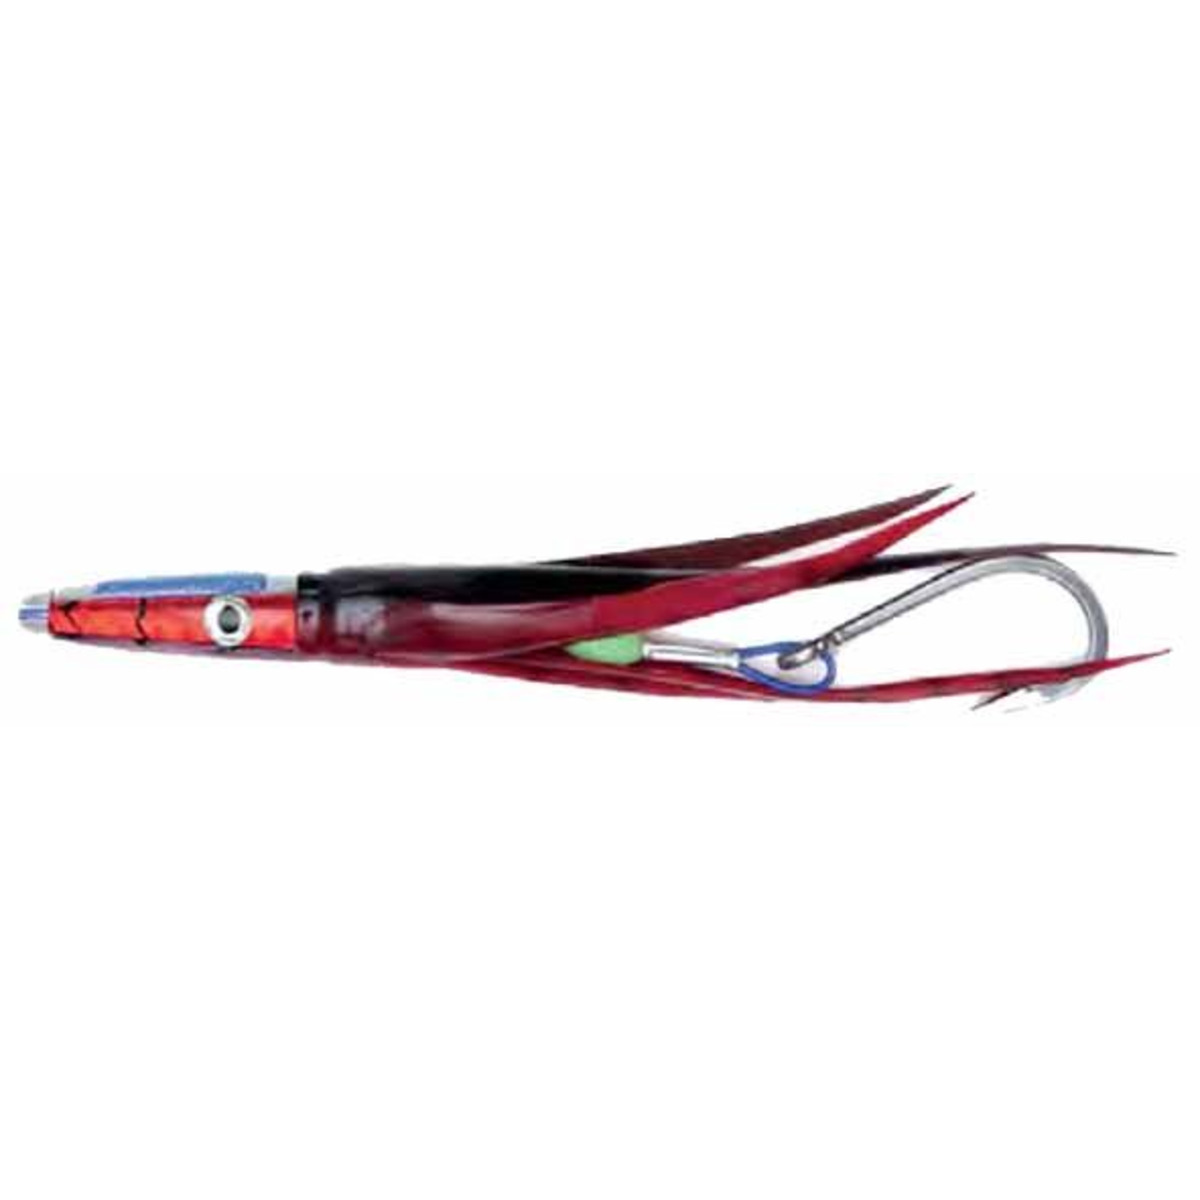 H2o Pro Shallow Tail - Red Black - 19 cm